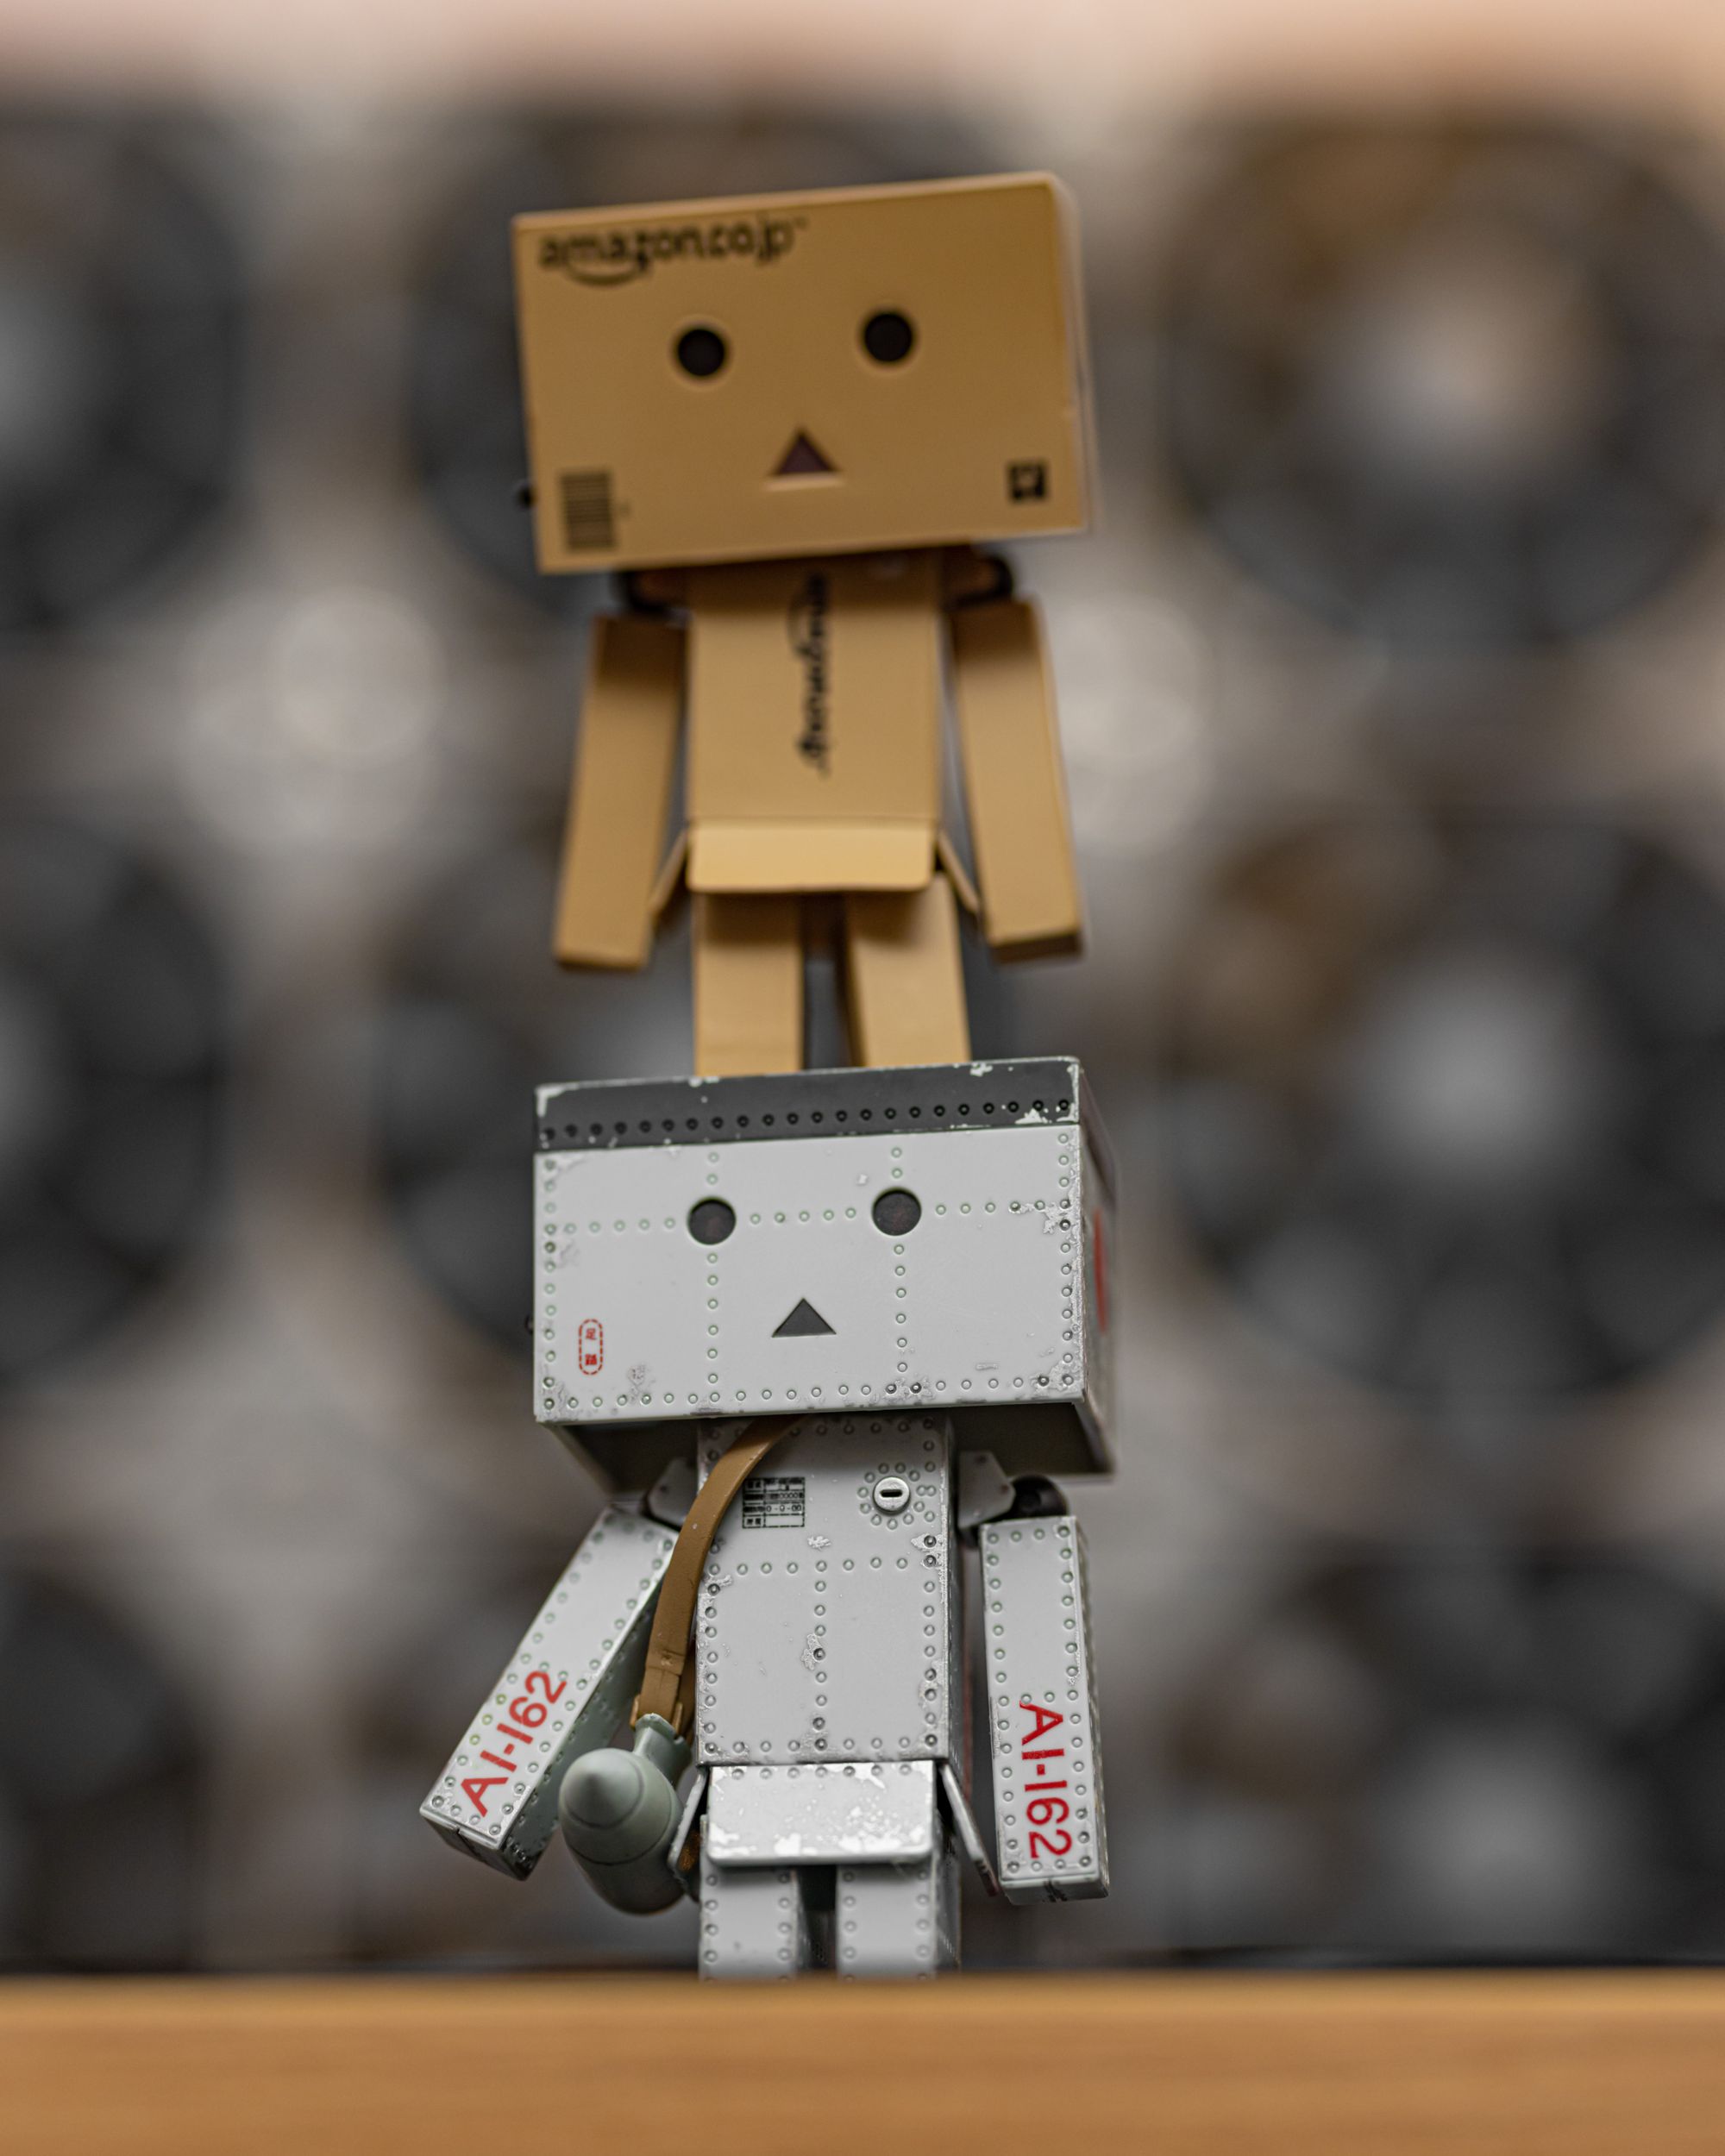 What’s That Little Box Robot in Your Photos? It’s Danbo!